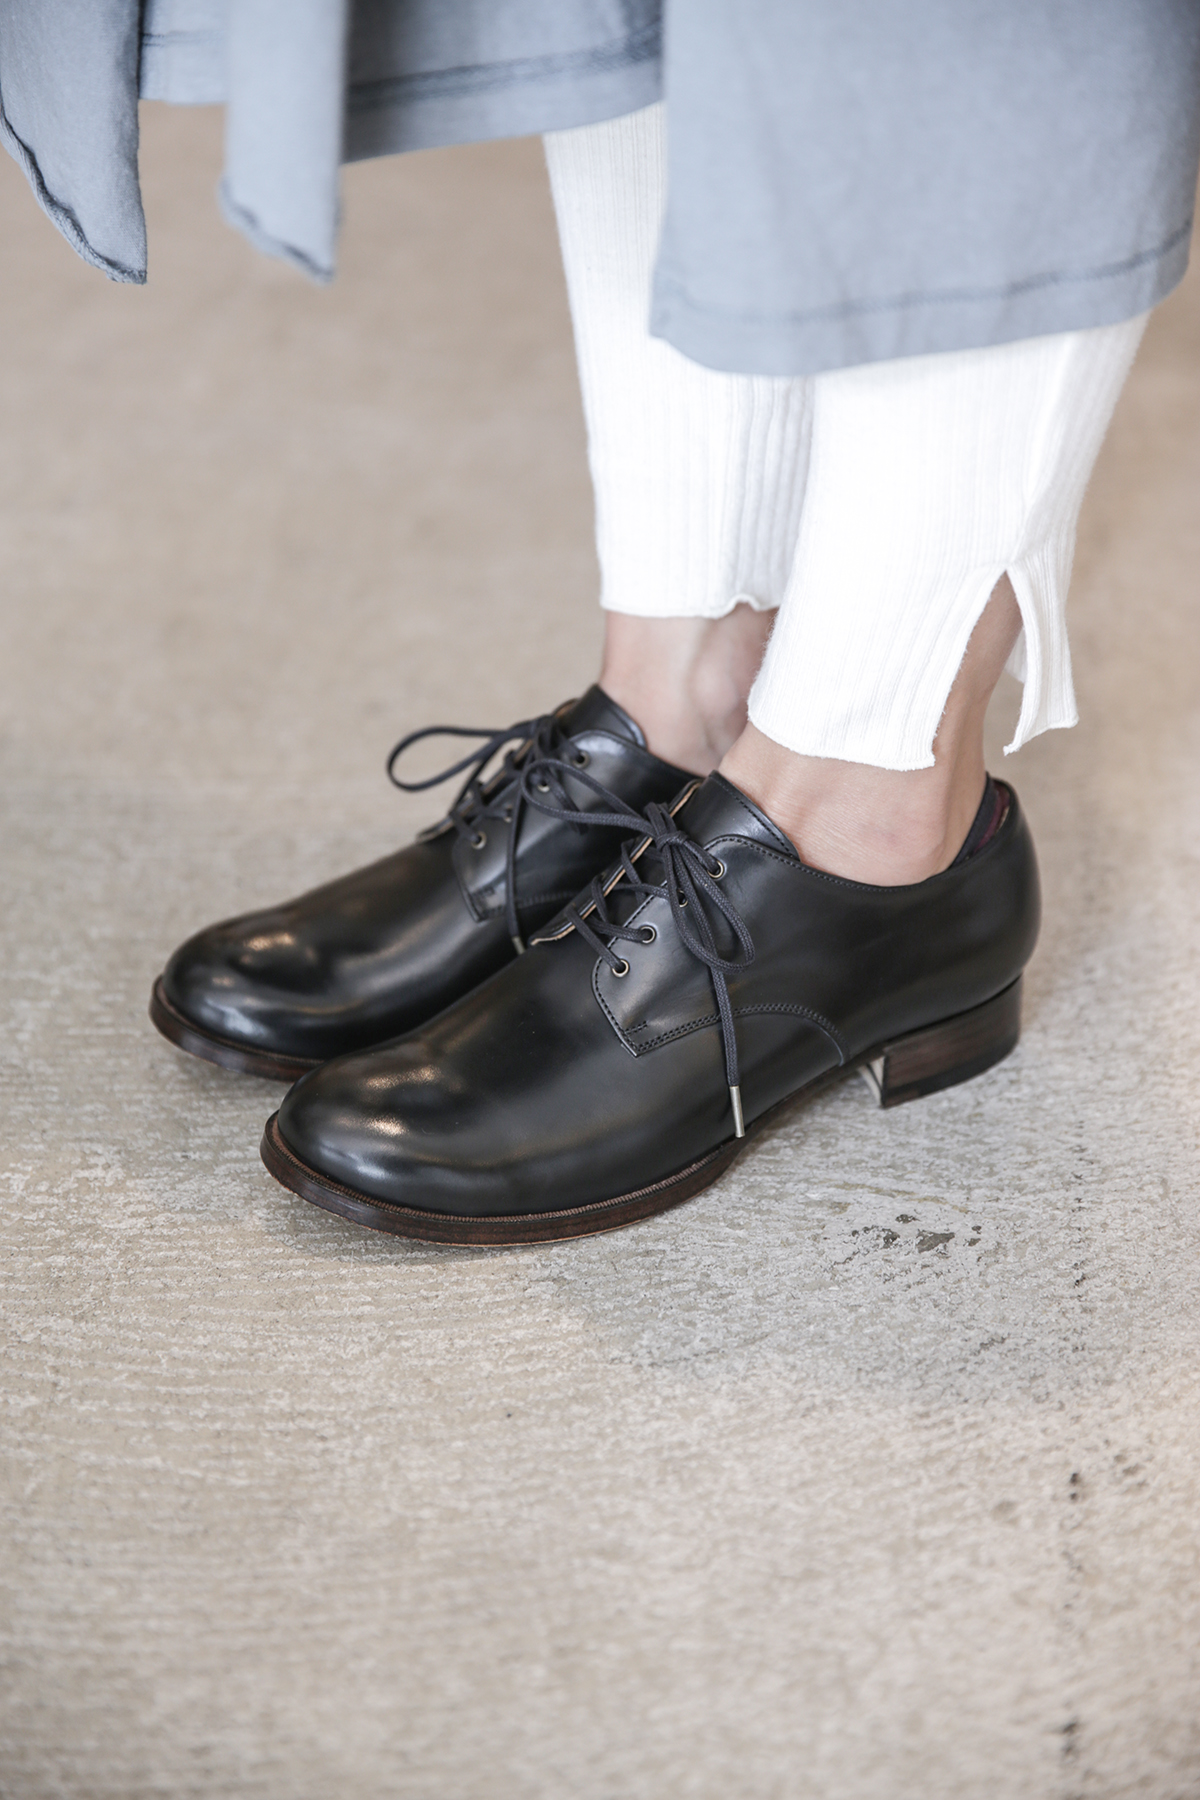 Blucher plain toe 4 hole/Baby calf mckay | ANOTHER LOUNGE